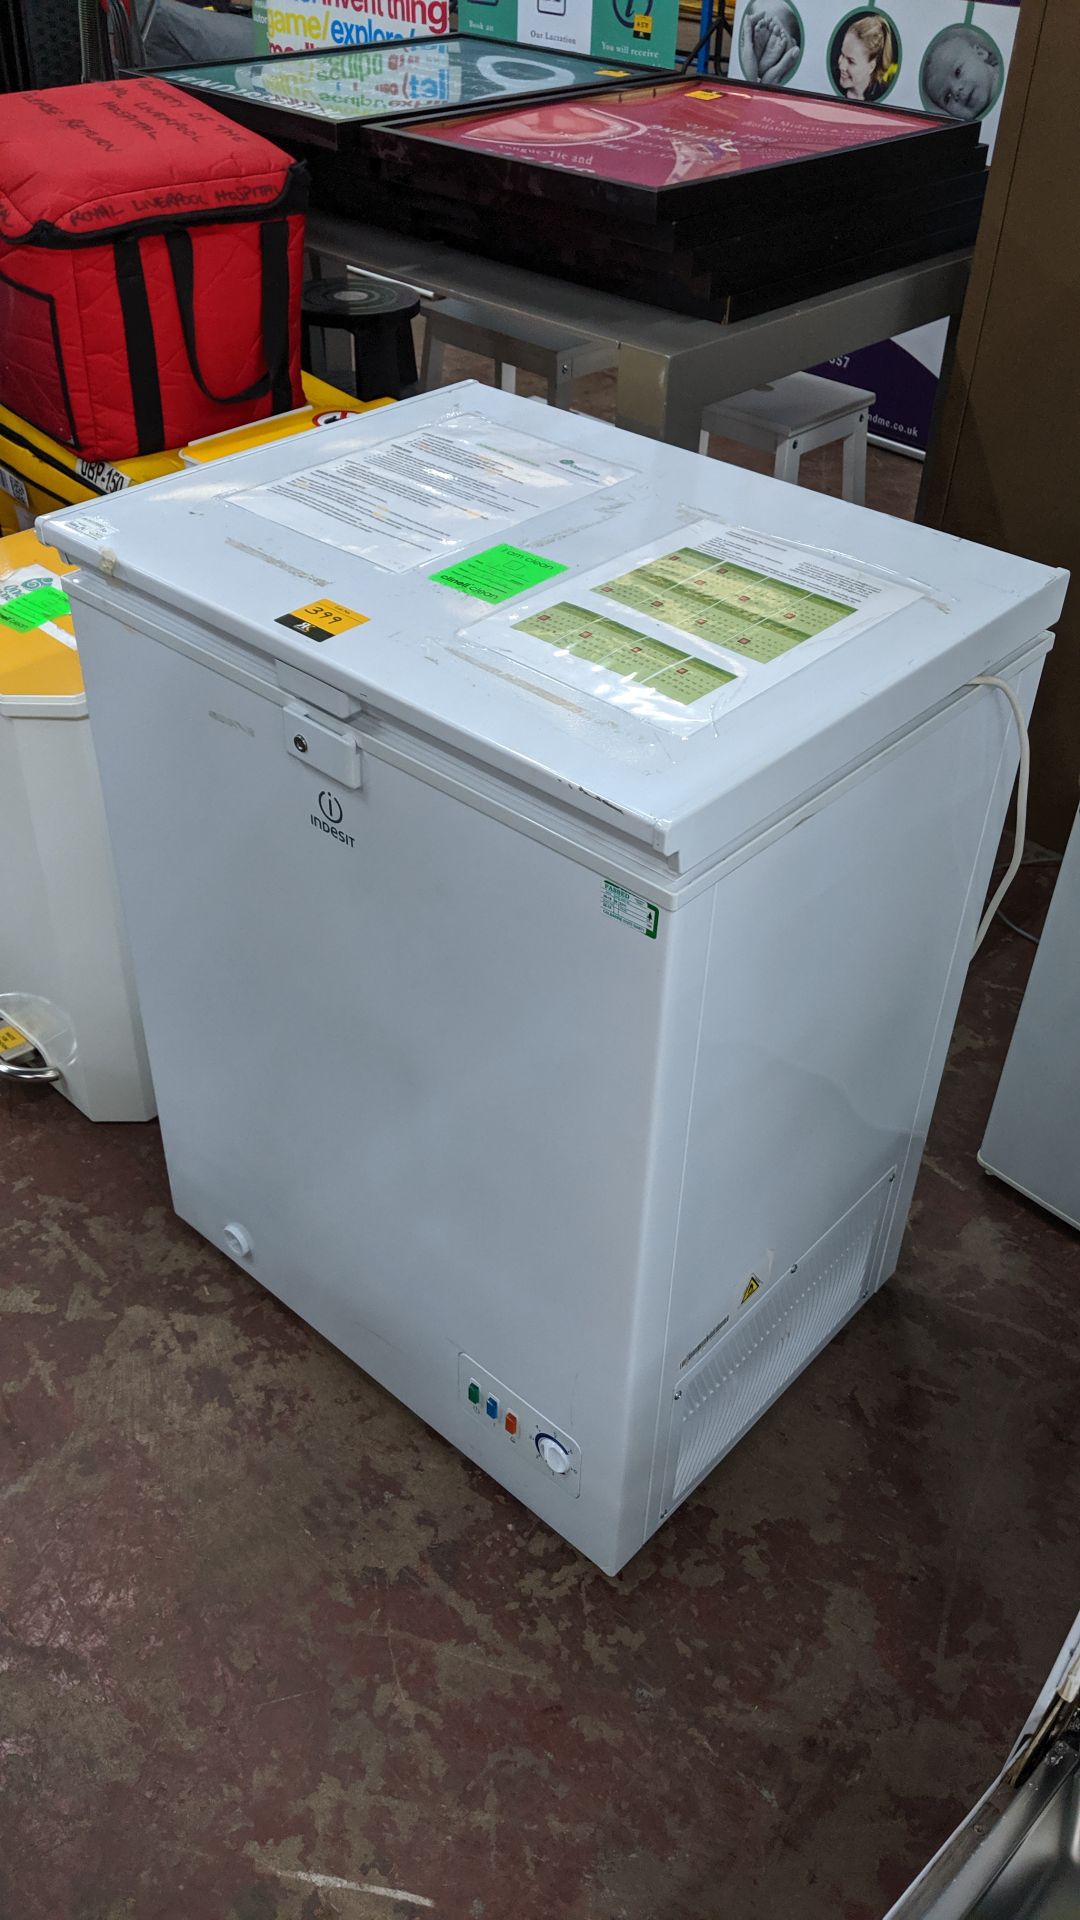 Indesit chest freezer OFIA100UK. This is one of a large number of lots used/owned by One To One (